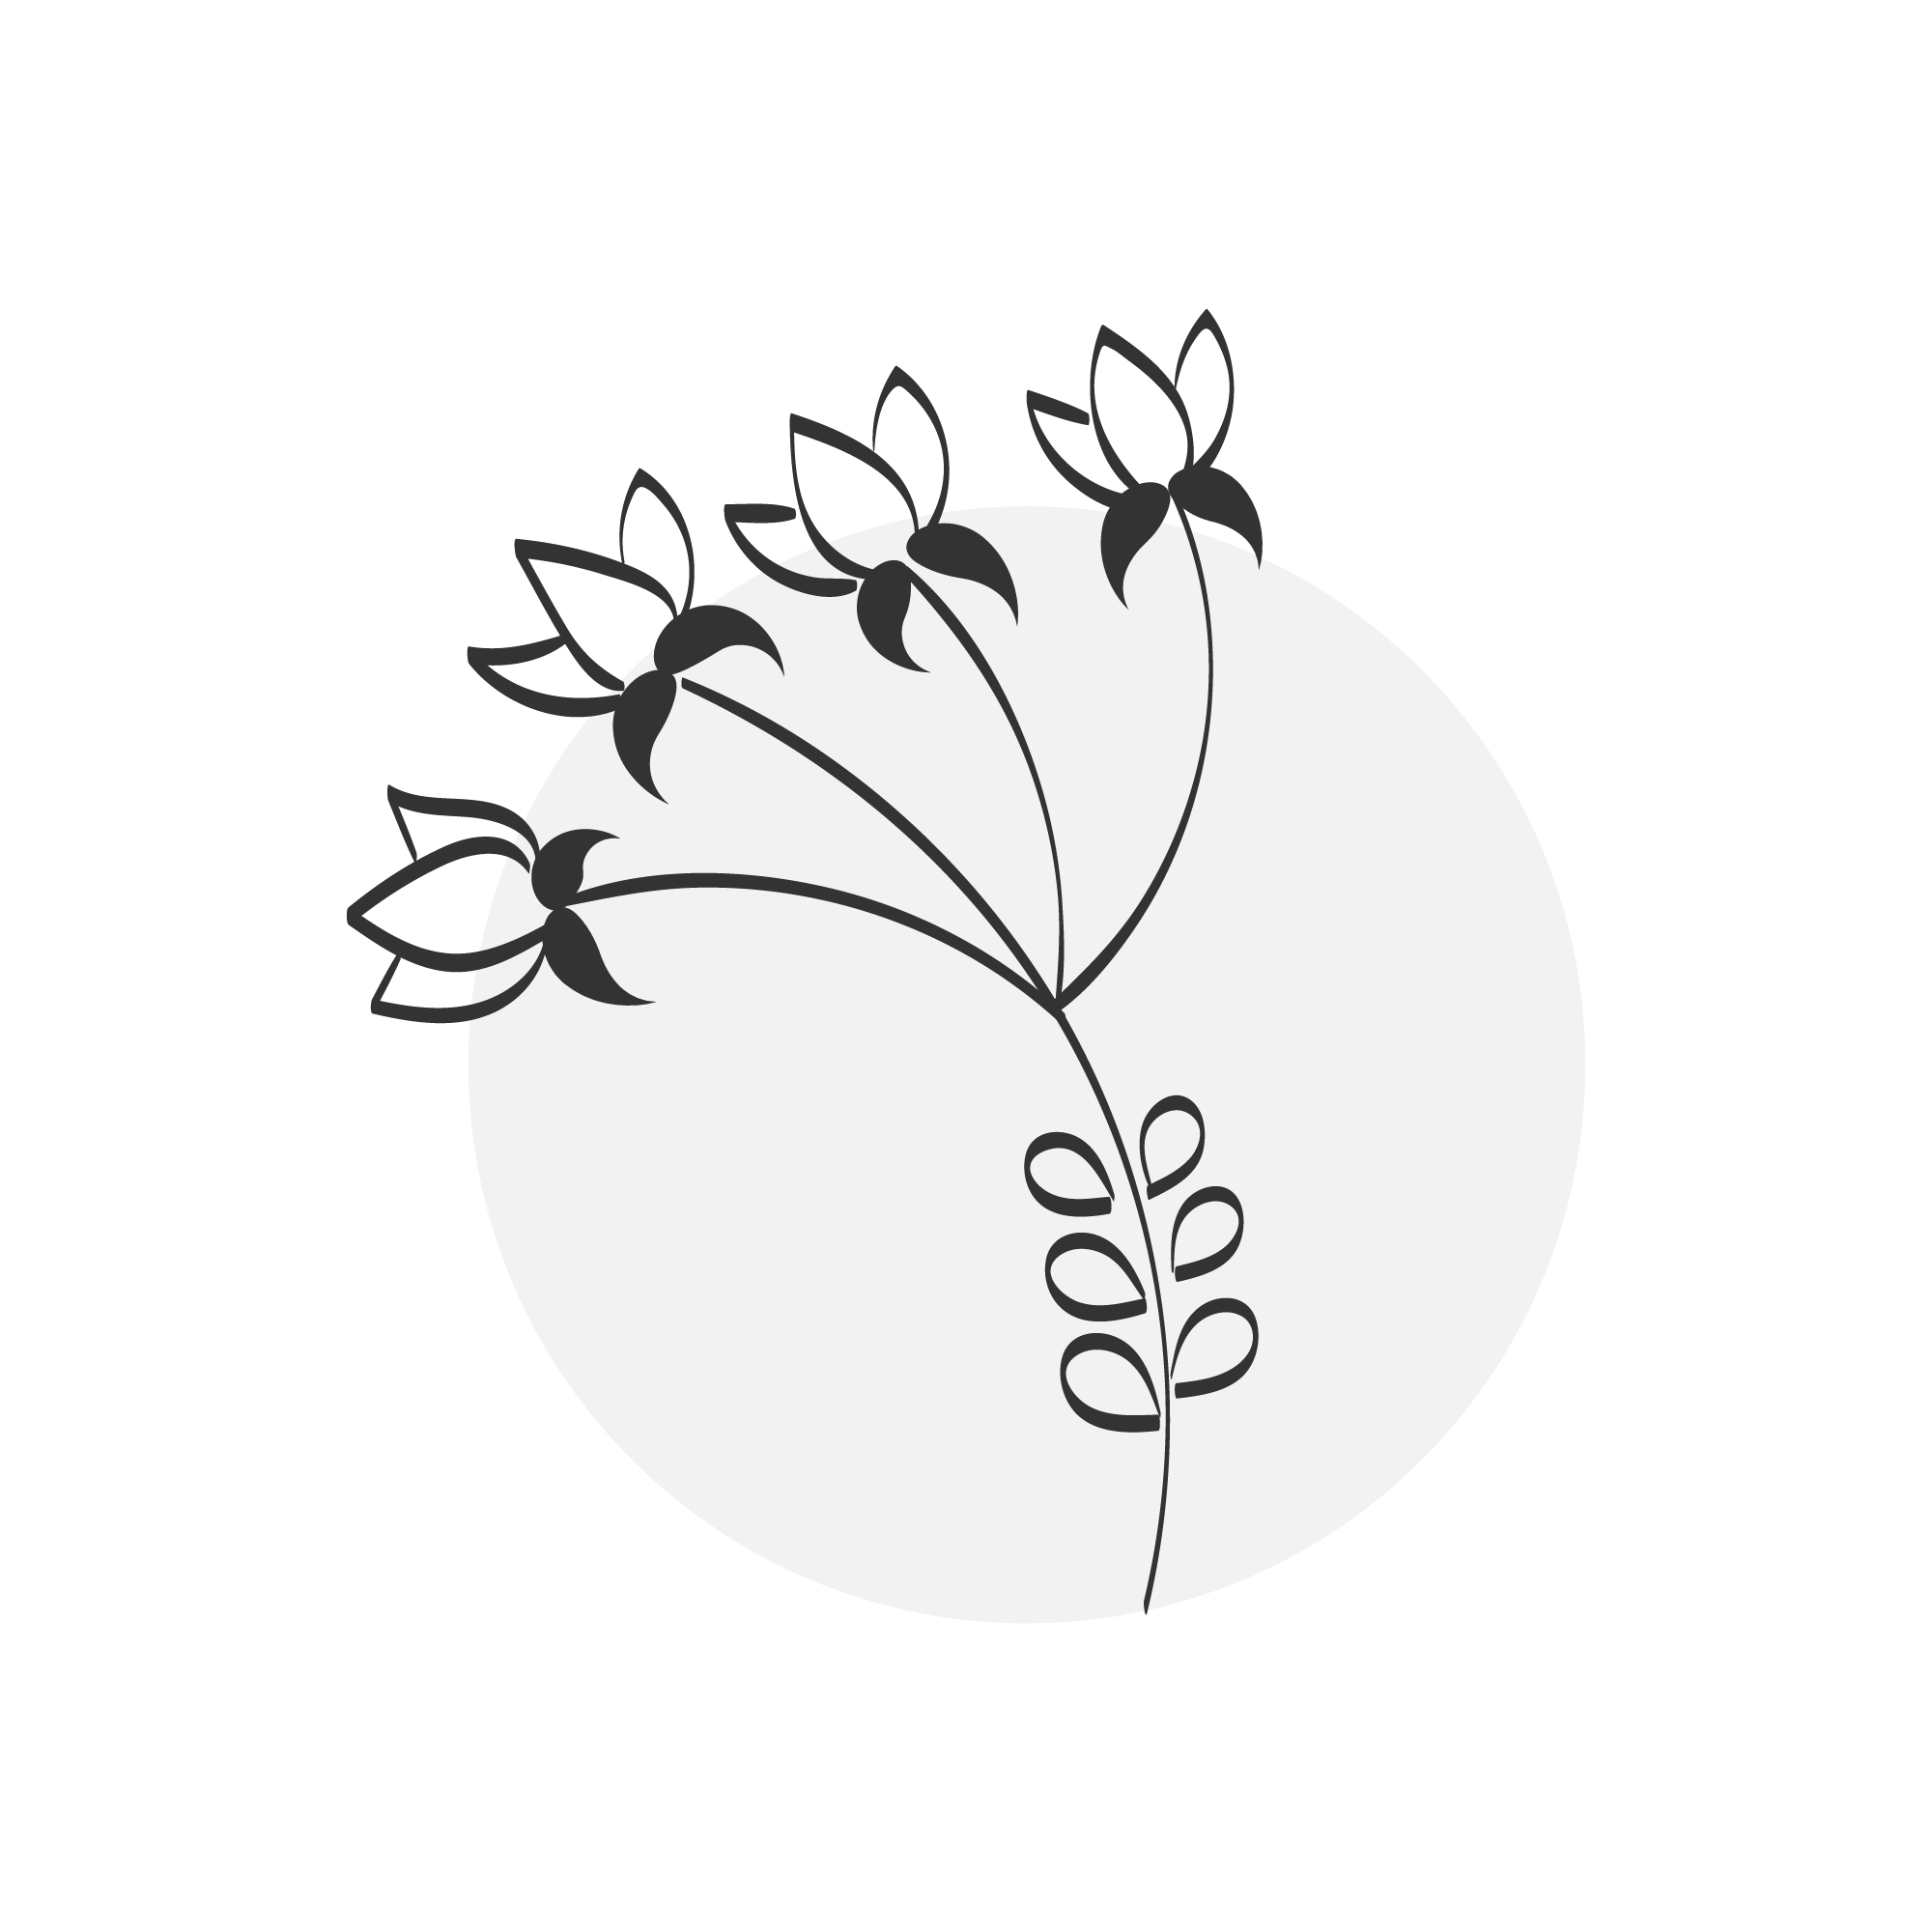 10 Flower Drawing With Line-Art for your ideas.